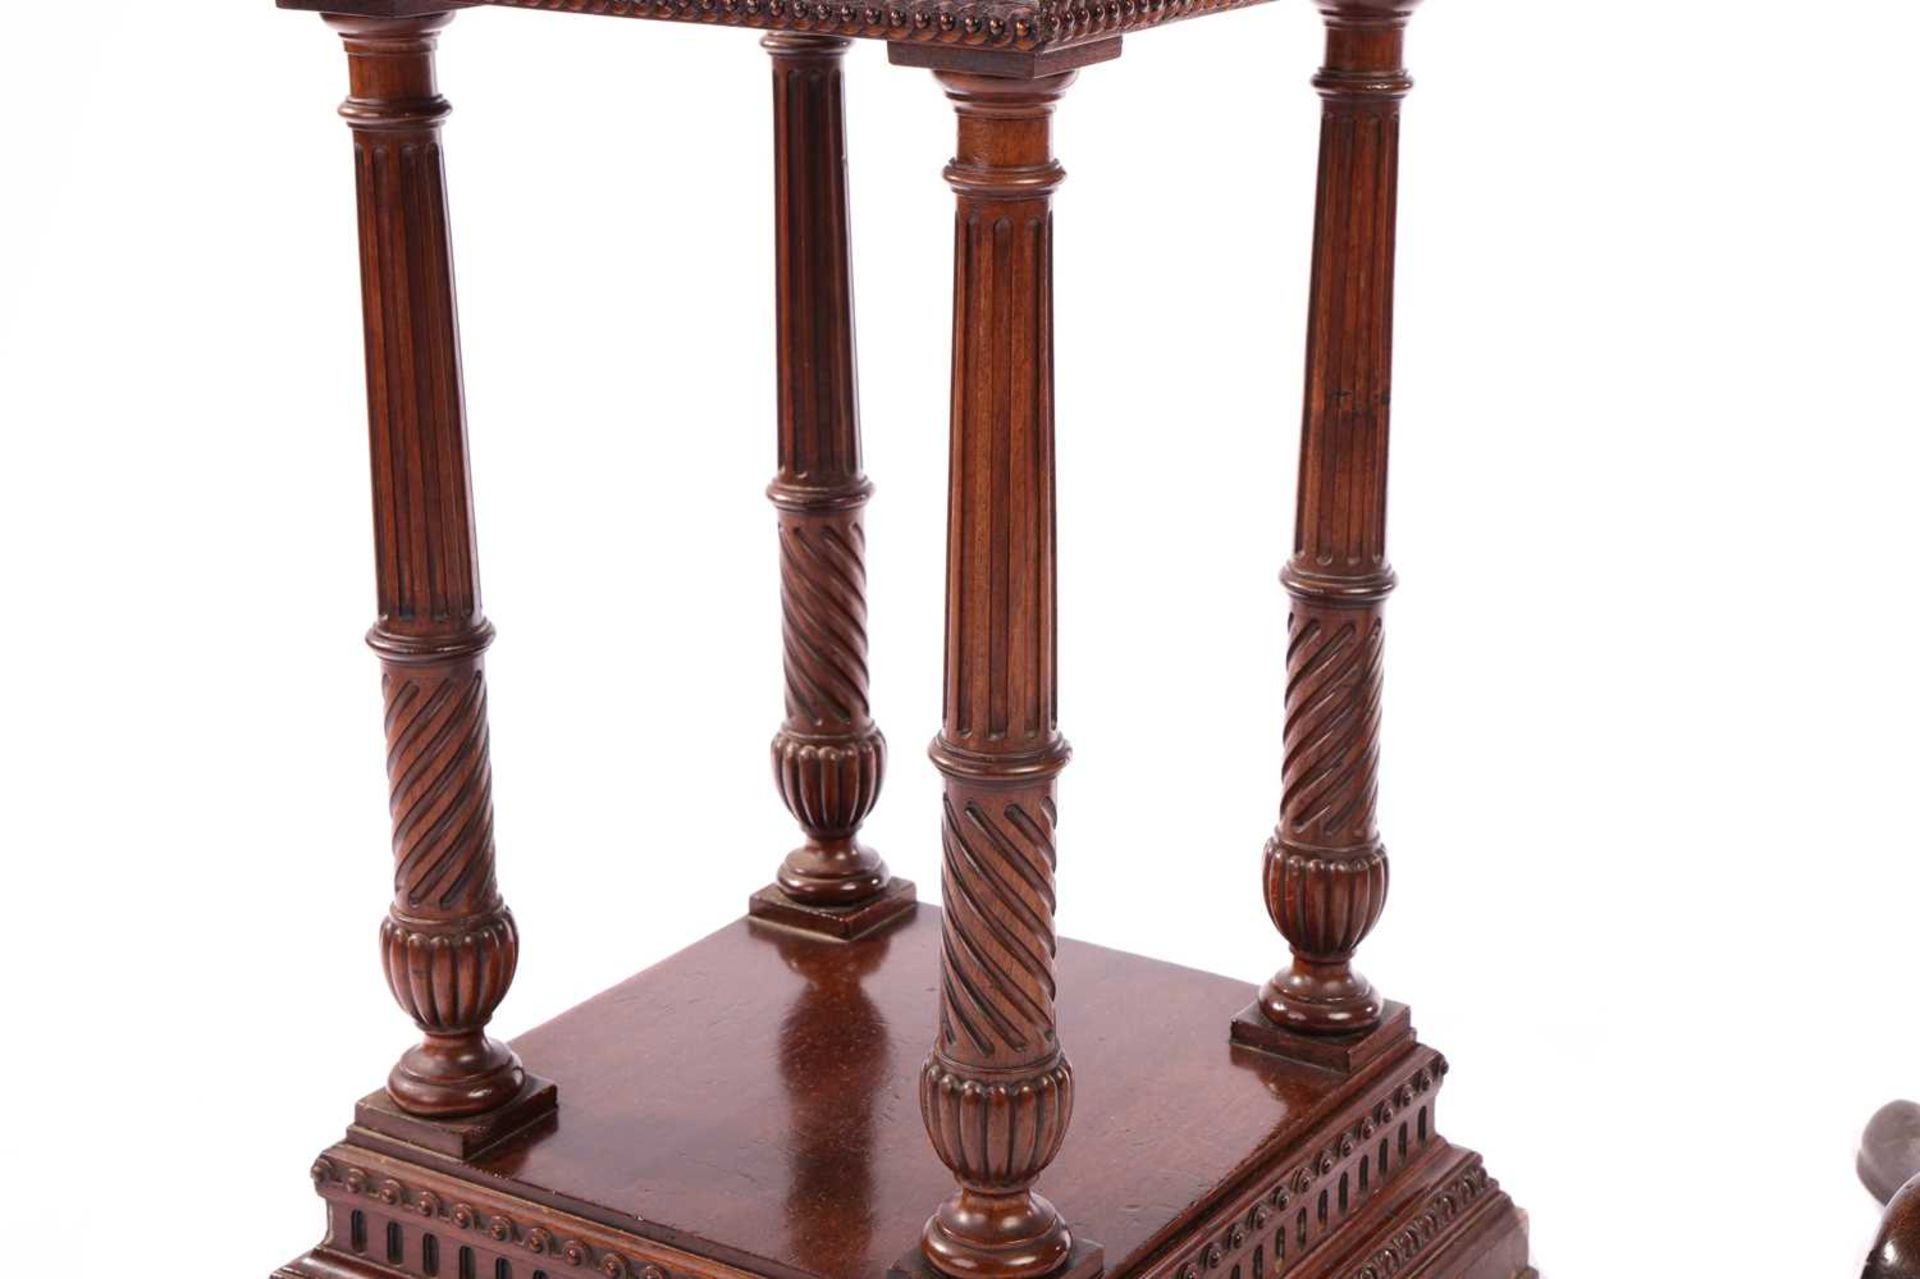 An Edwardian mahogany two-tier pedestal of architectural, form with dentil moulding and fluted colum - Image 4 of 6